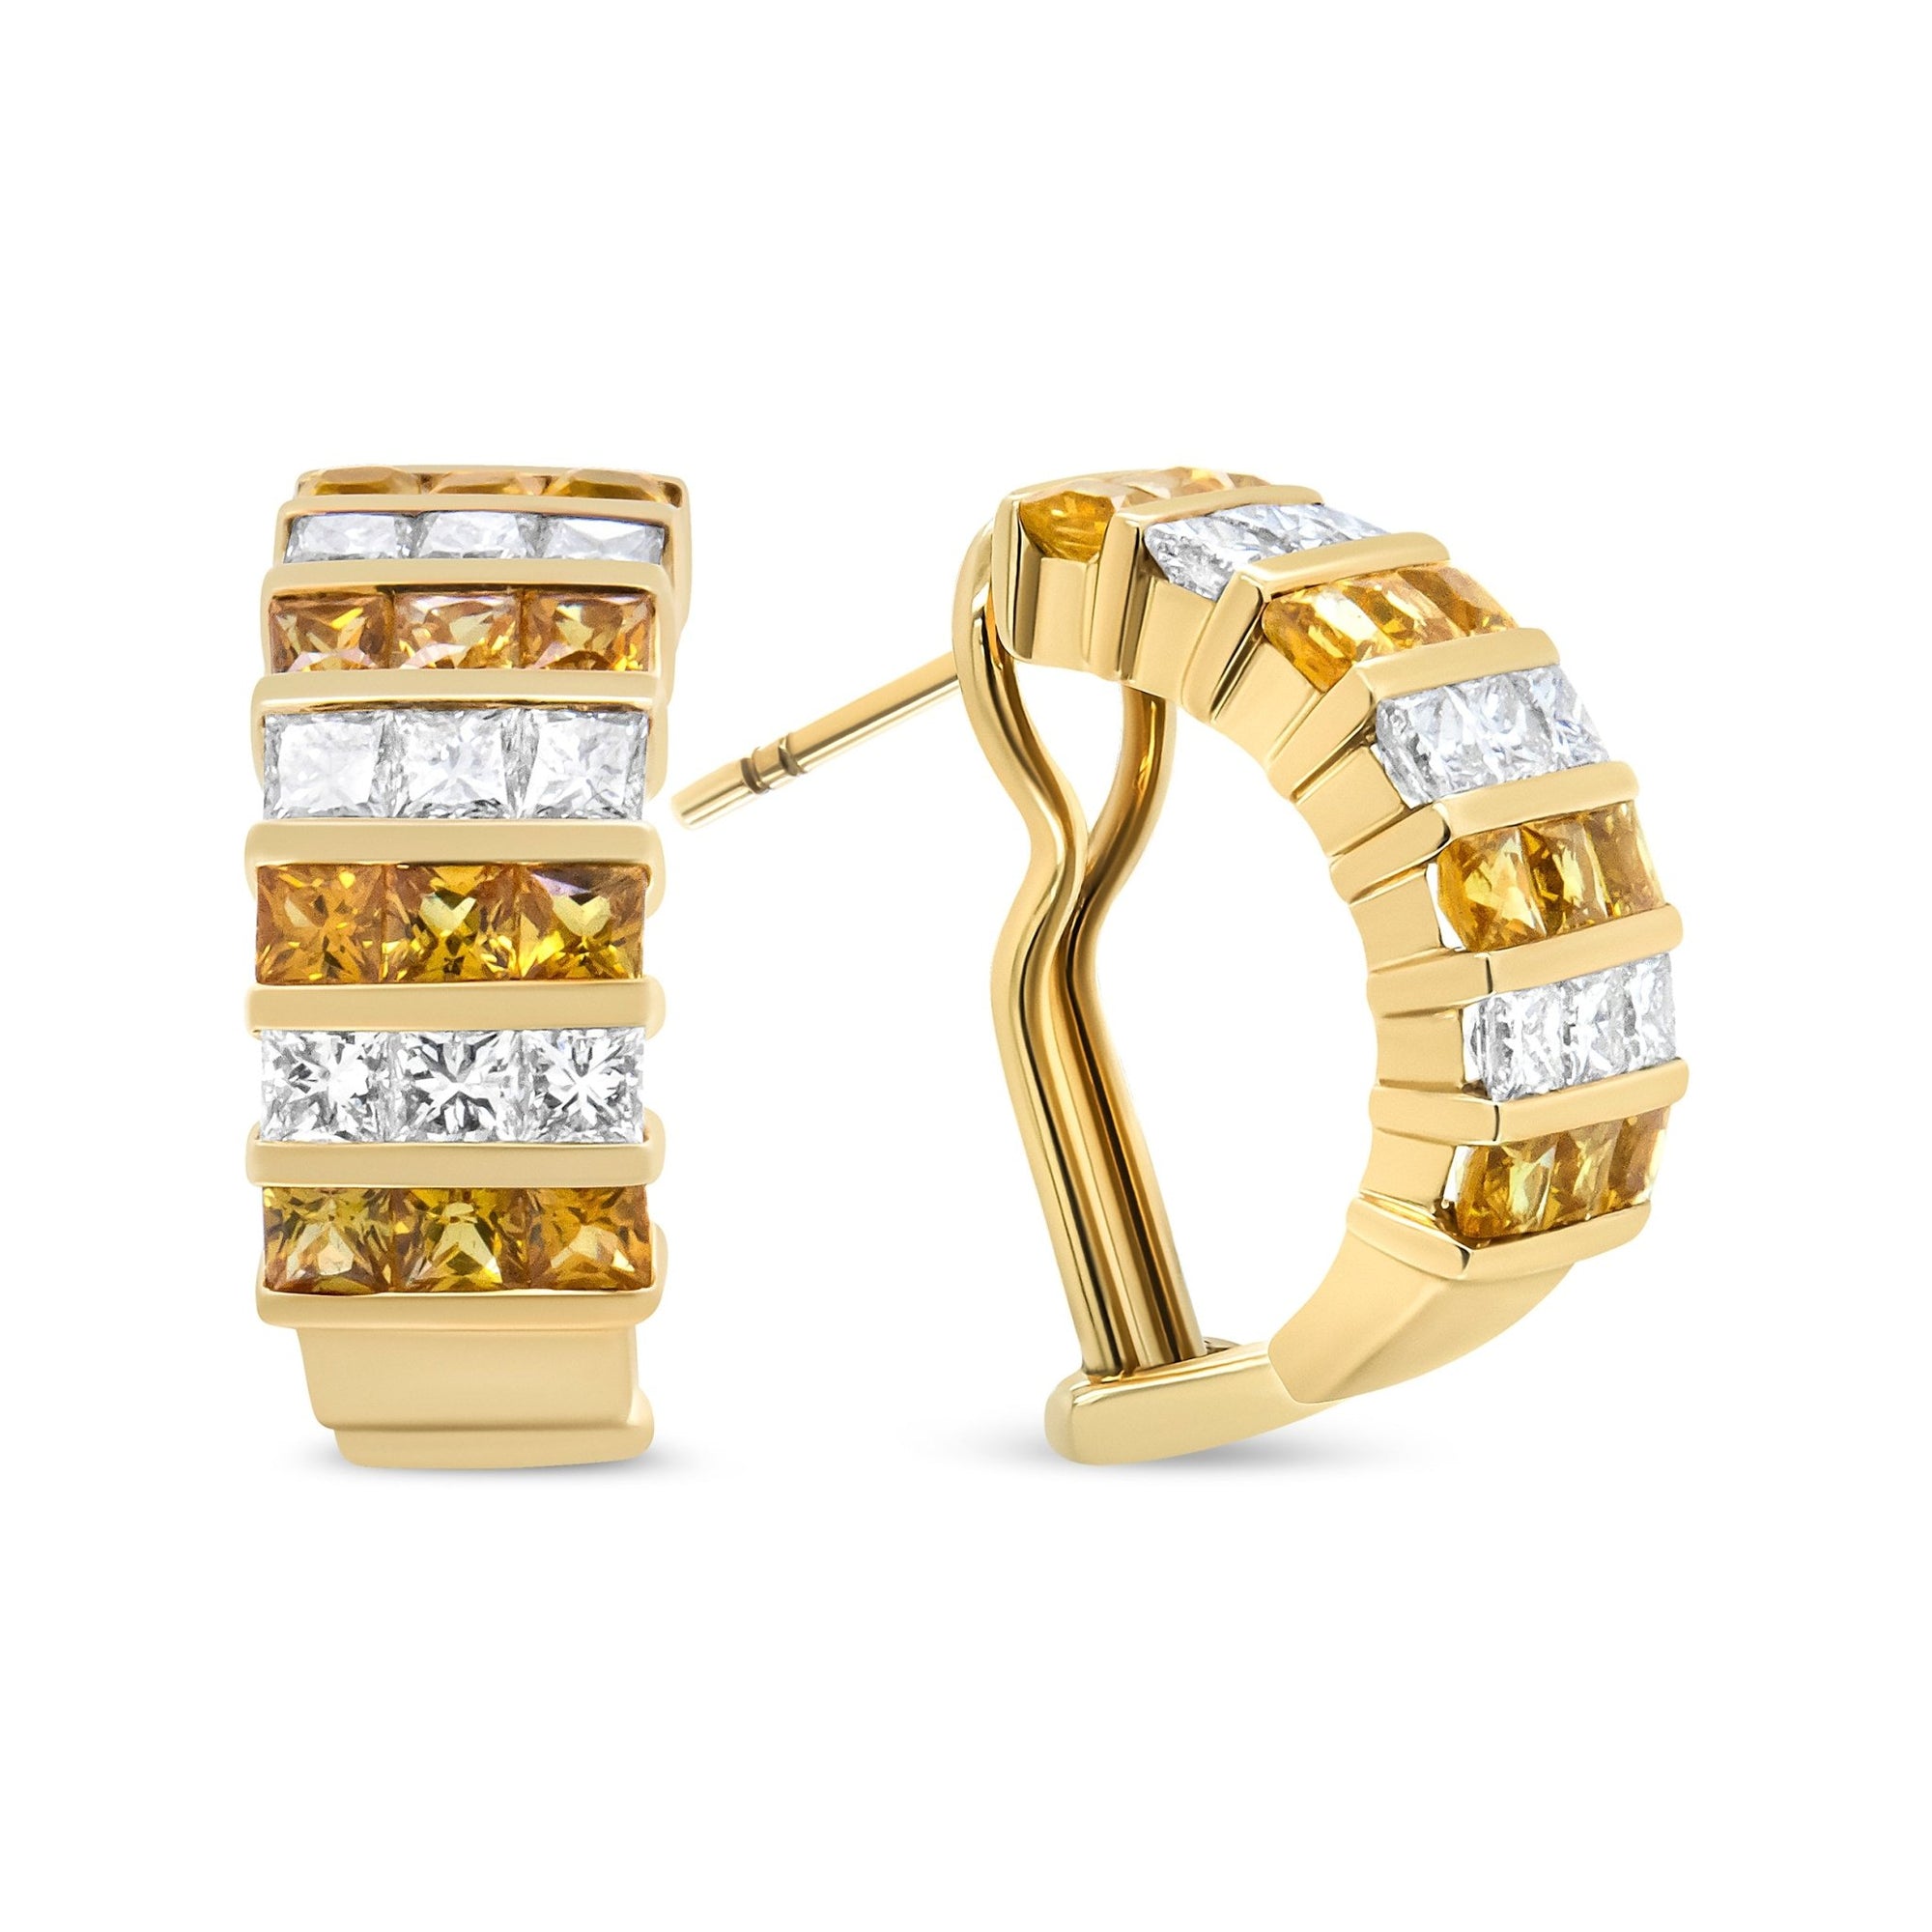 18K Yellow Gold 1 3/4 Cttw Invisible Set Princess Cut Diamond and 2.5mm Yellow Sapphire Huggie Hoop Earrings (F-G Color, VS1-VS2 Clarity) - LinkagejewelrydesignLinkagejewelrydesign